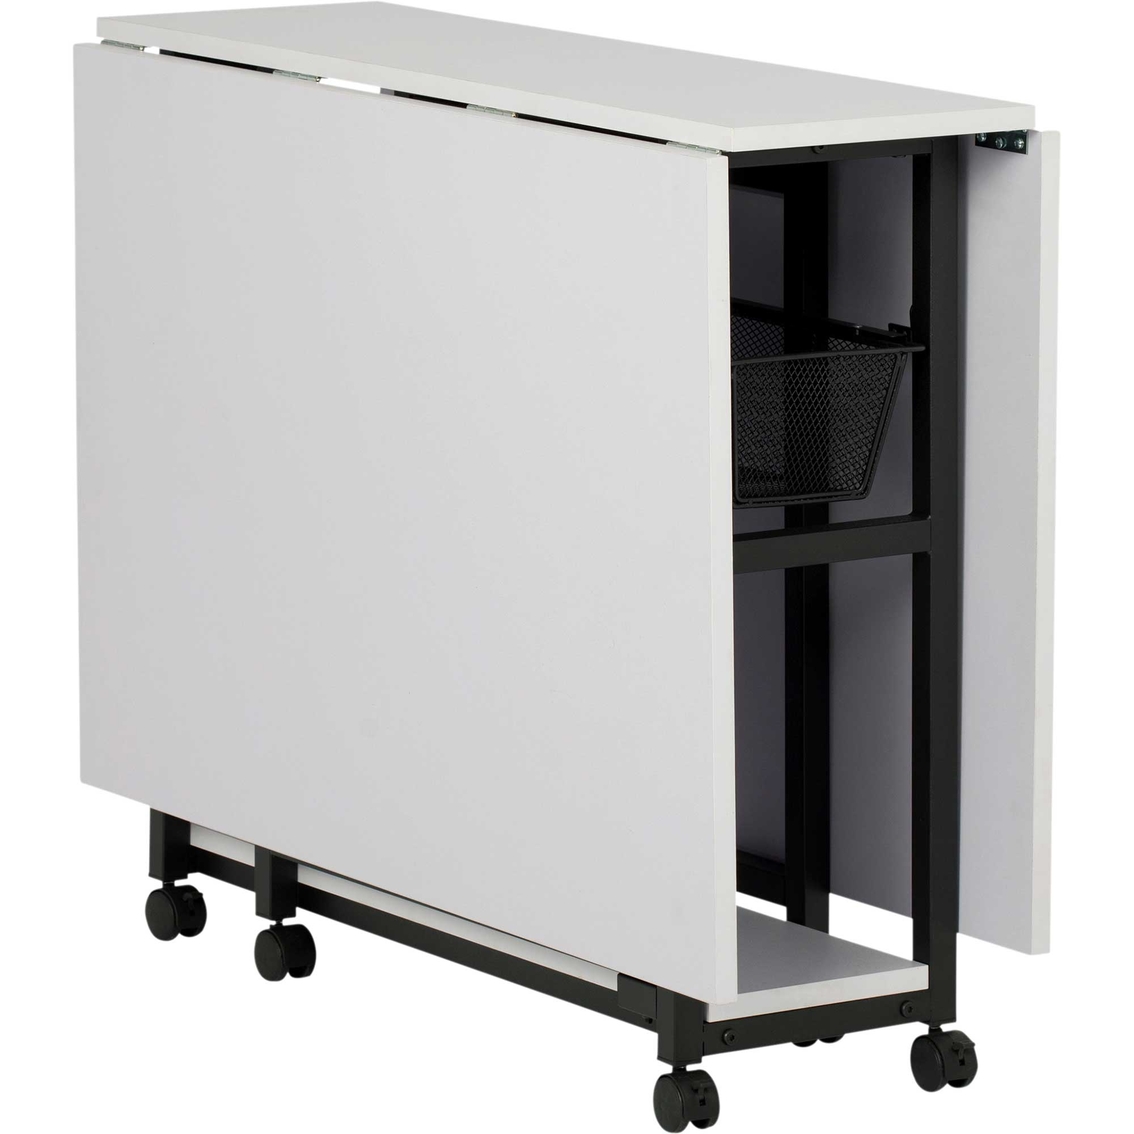 Studio Designs Home Mobile Fabric Cutting Table with Storage - Image 6 of 10